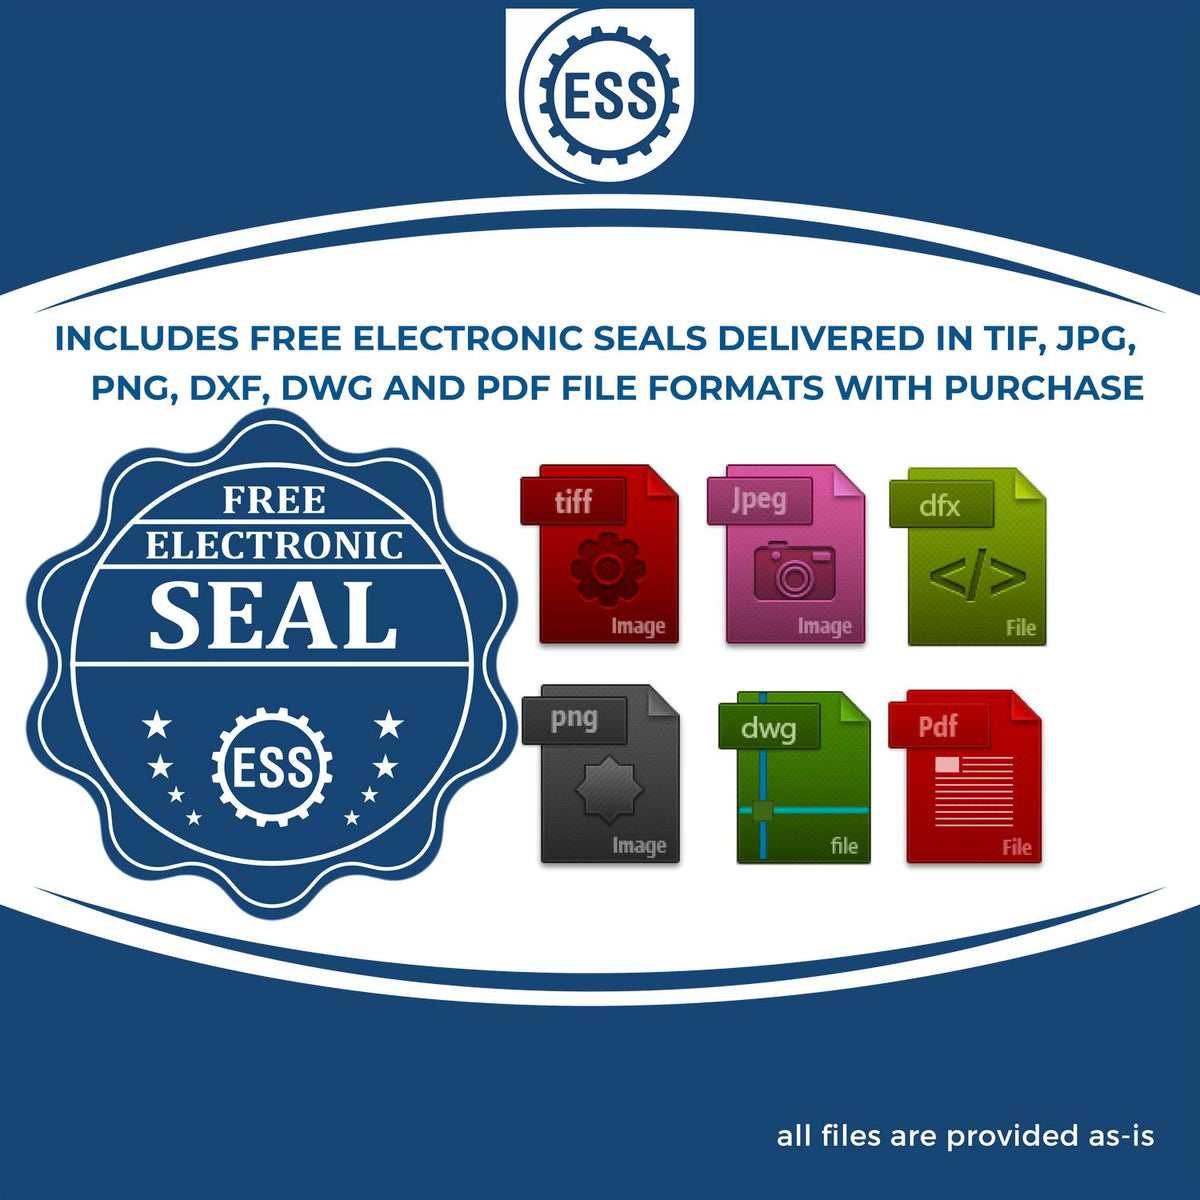 An infographic for the free electronic seal for the Washington Desk Architect Embossing Seal illustrating the different file type icons such as DXF, DWG, TIF, JPG and PNG.